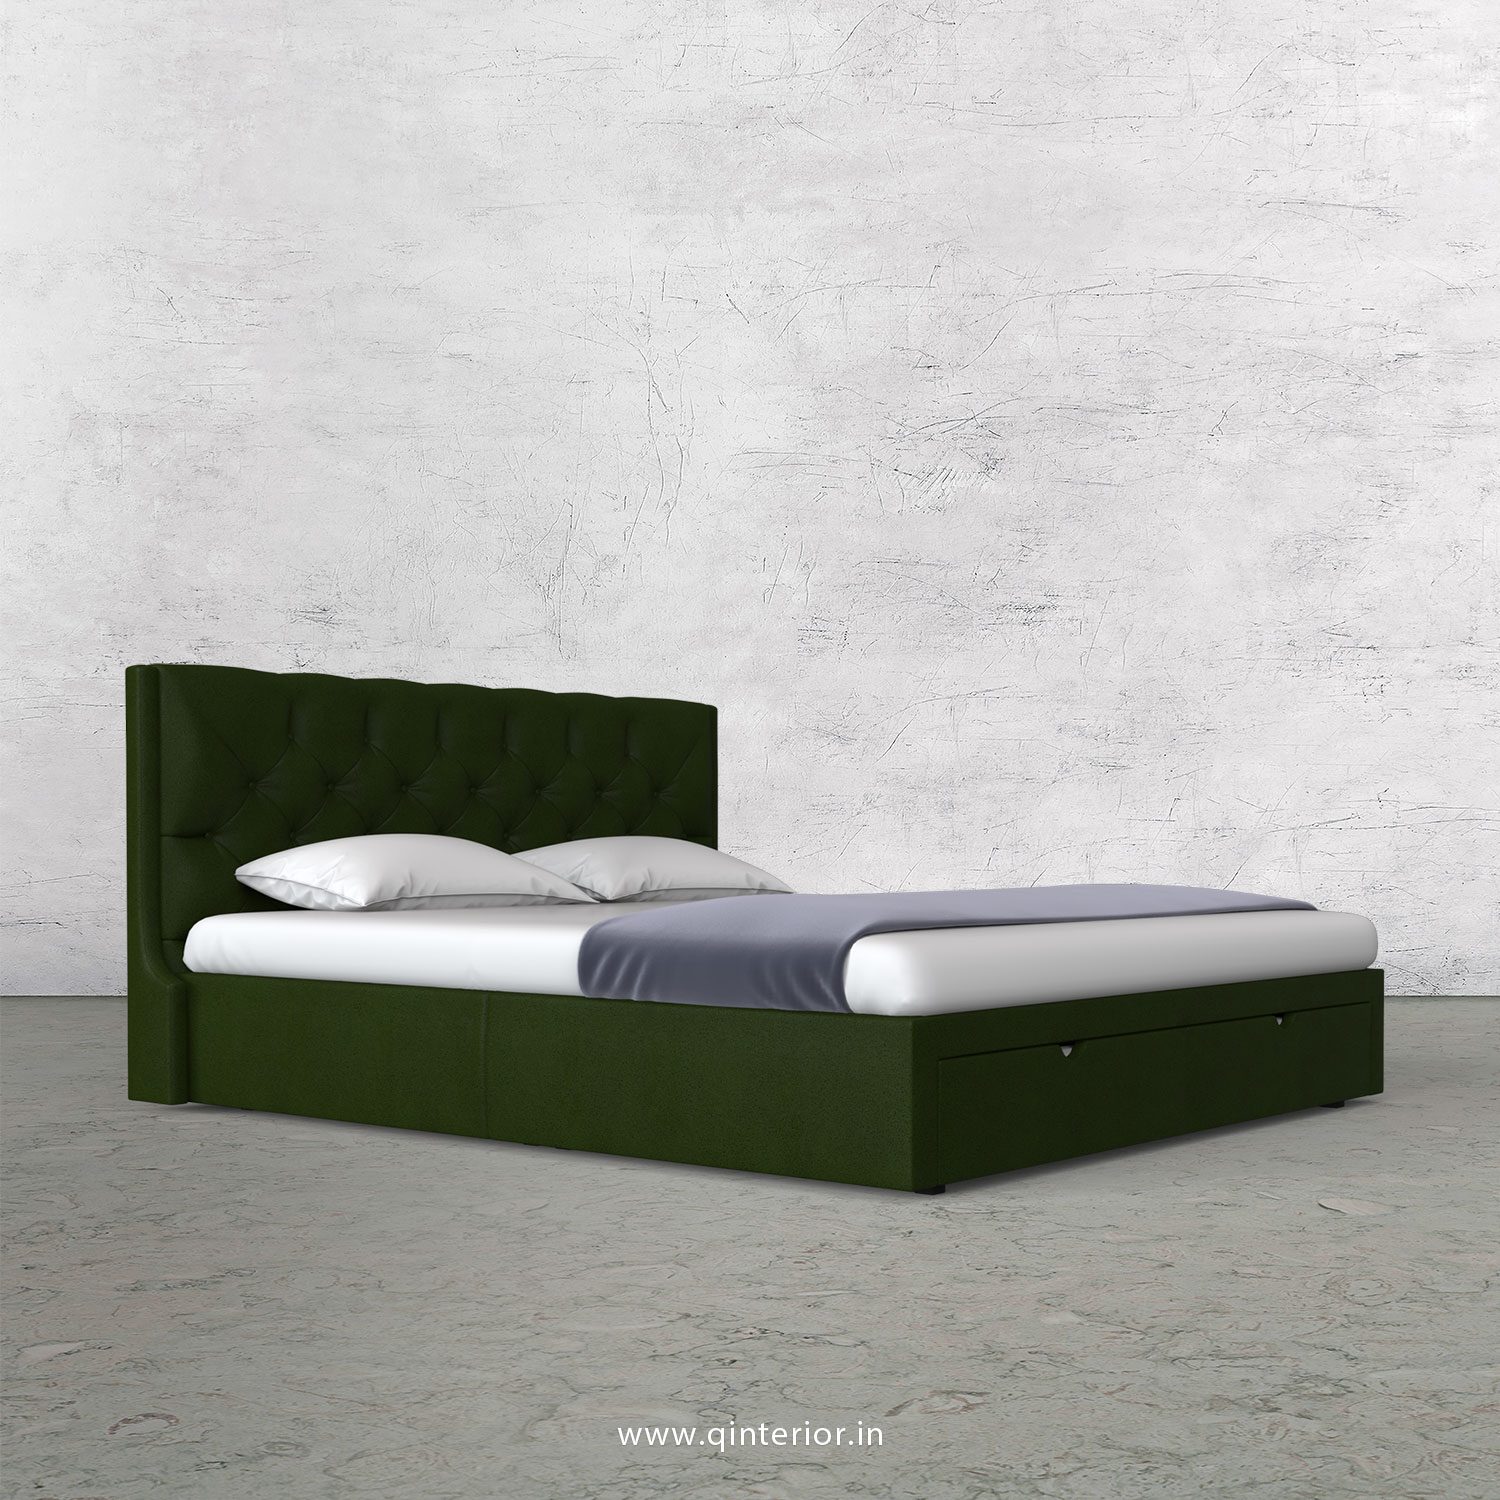 Scorpius King Size Storage Bed in Fab Leather Fabric - KBD001 FL04